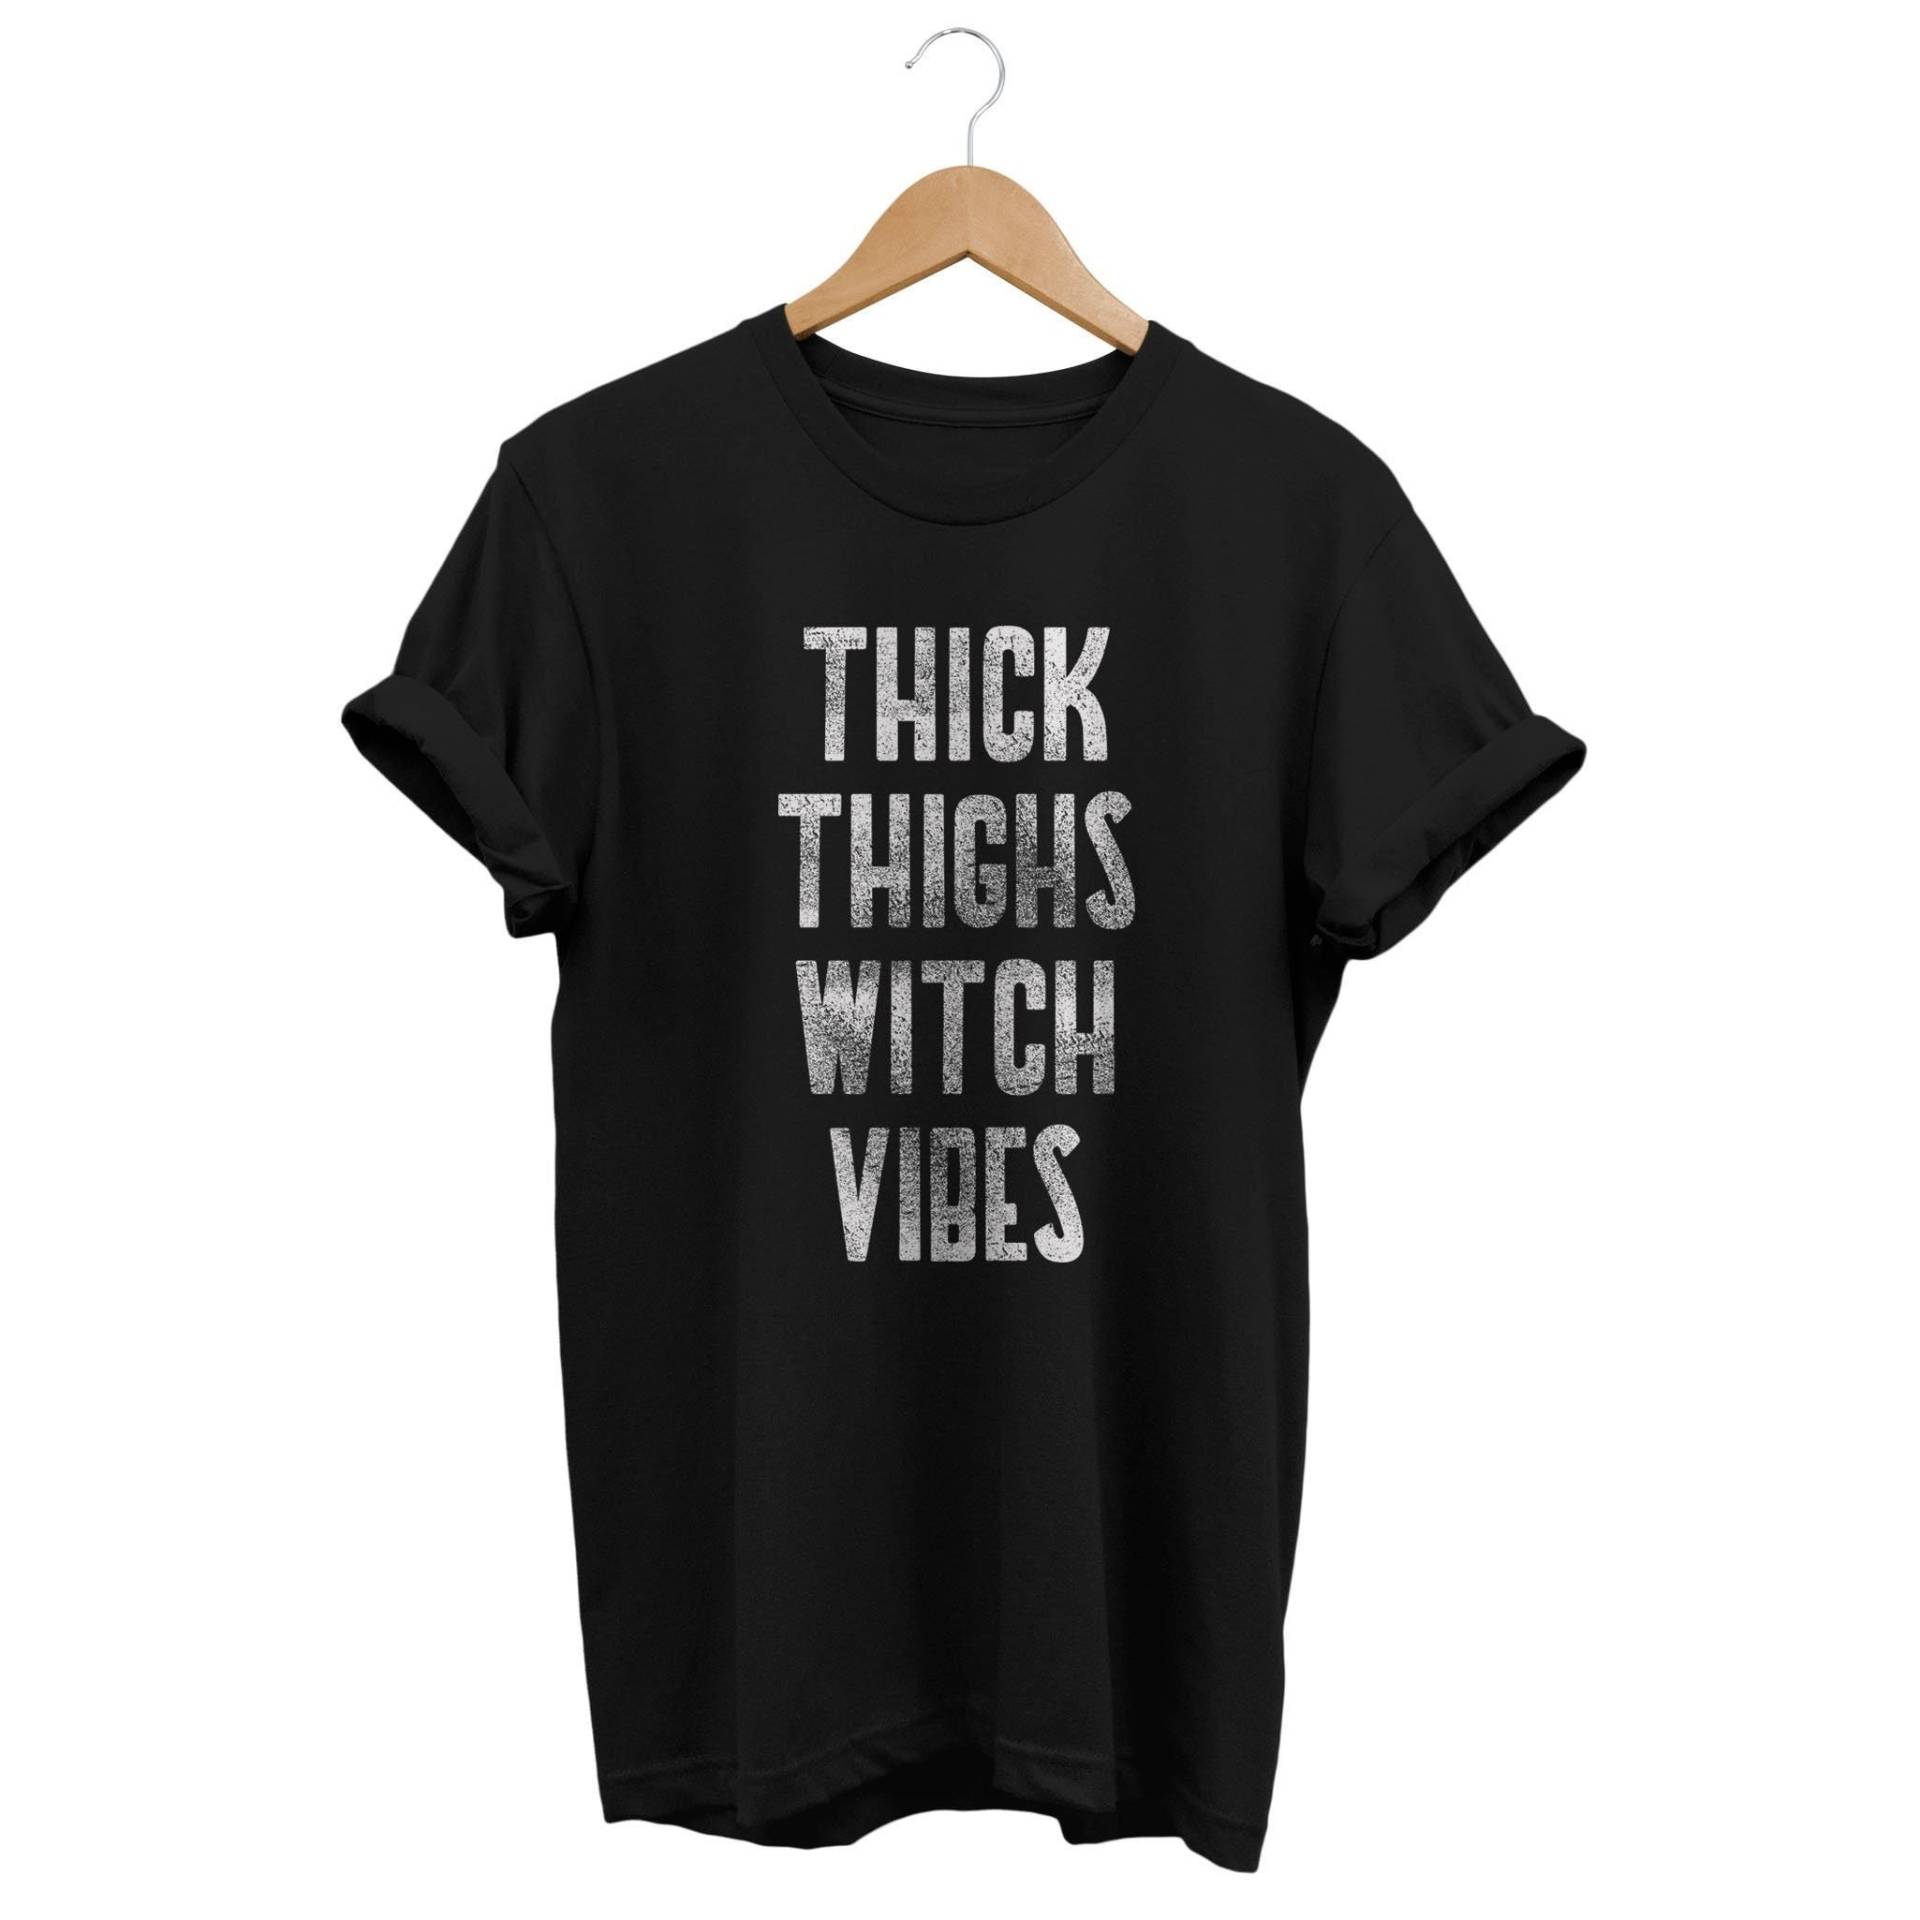 Dickes Oberschenkel Hexen Vibes Shirt, Grunge Kleidung, Gothic Wiccan T, Okkultismus Edgy Outfit, Witchy Frauen, E-Girl Kleidung von ElephanTees